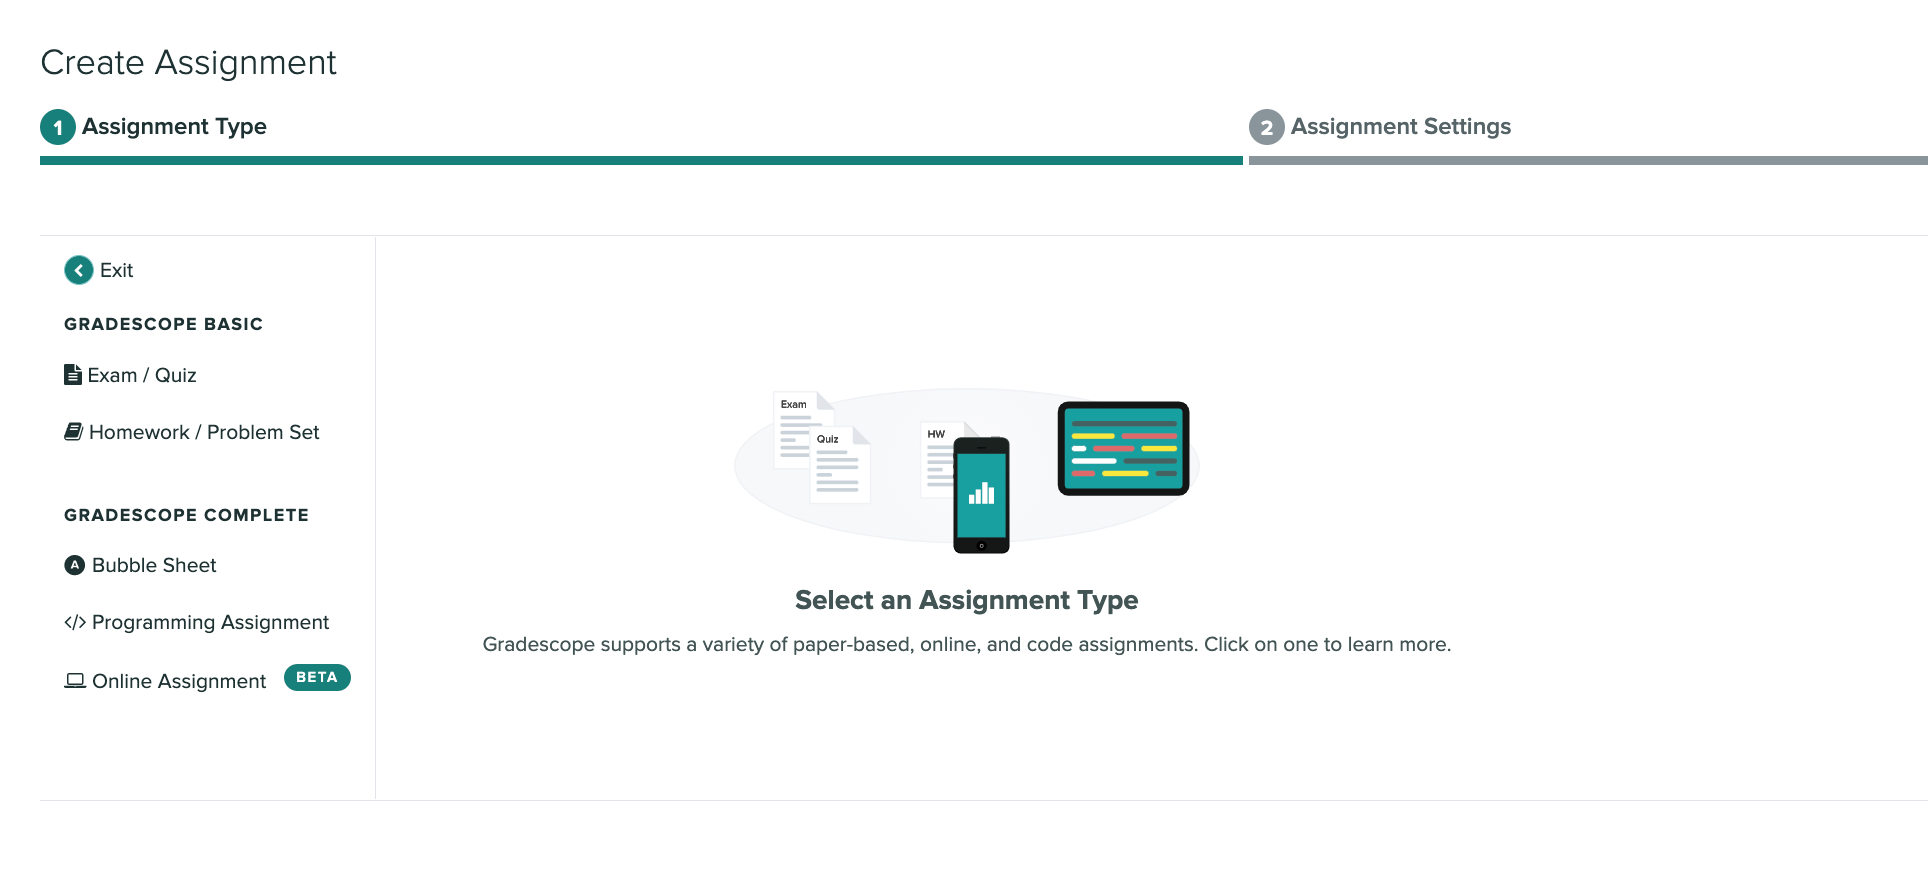 A screen capture of the Create Assignment page that displays all the assignment types to choose and create in Gradescope. 